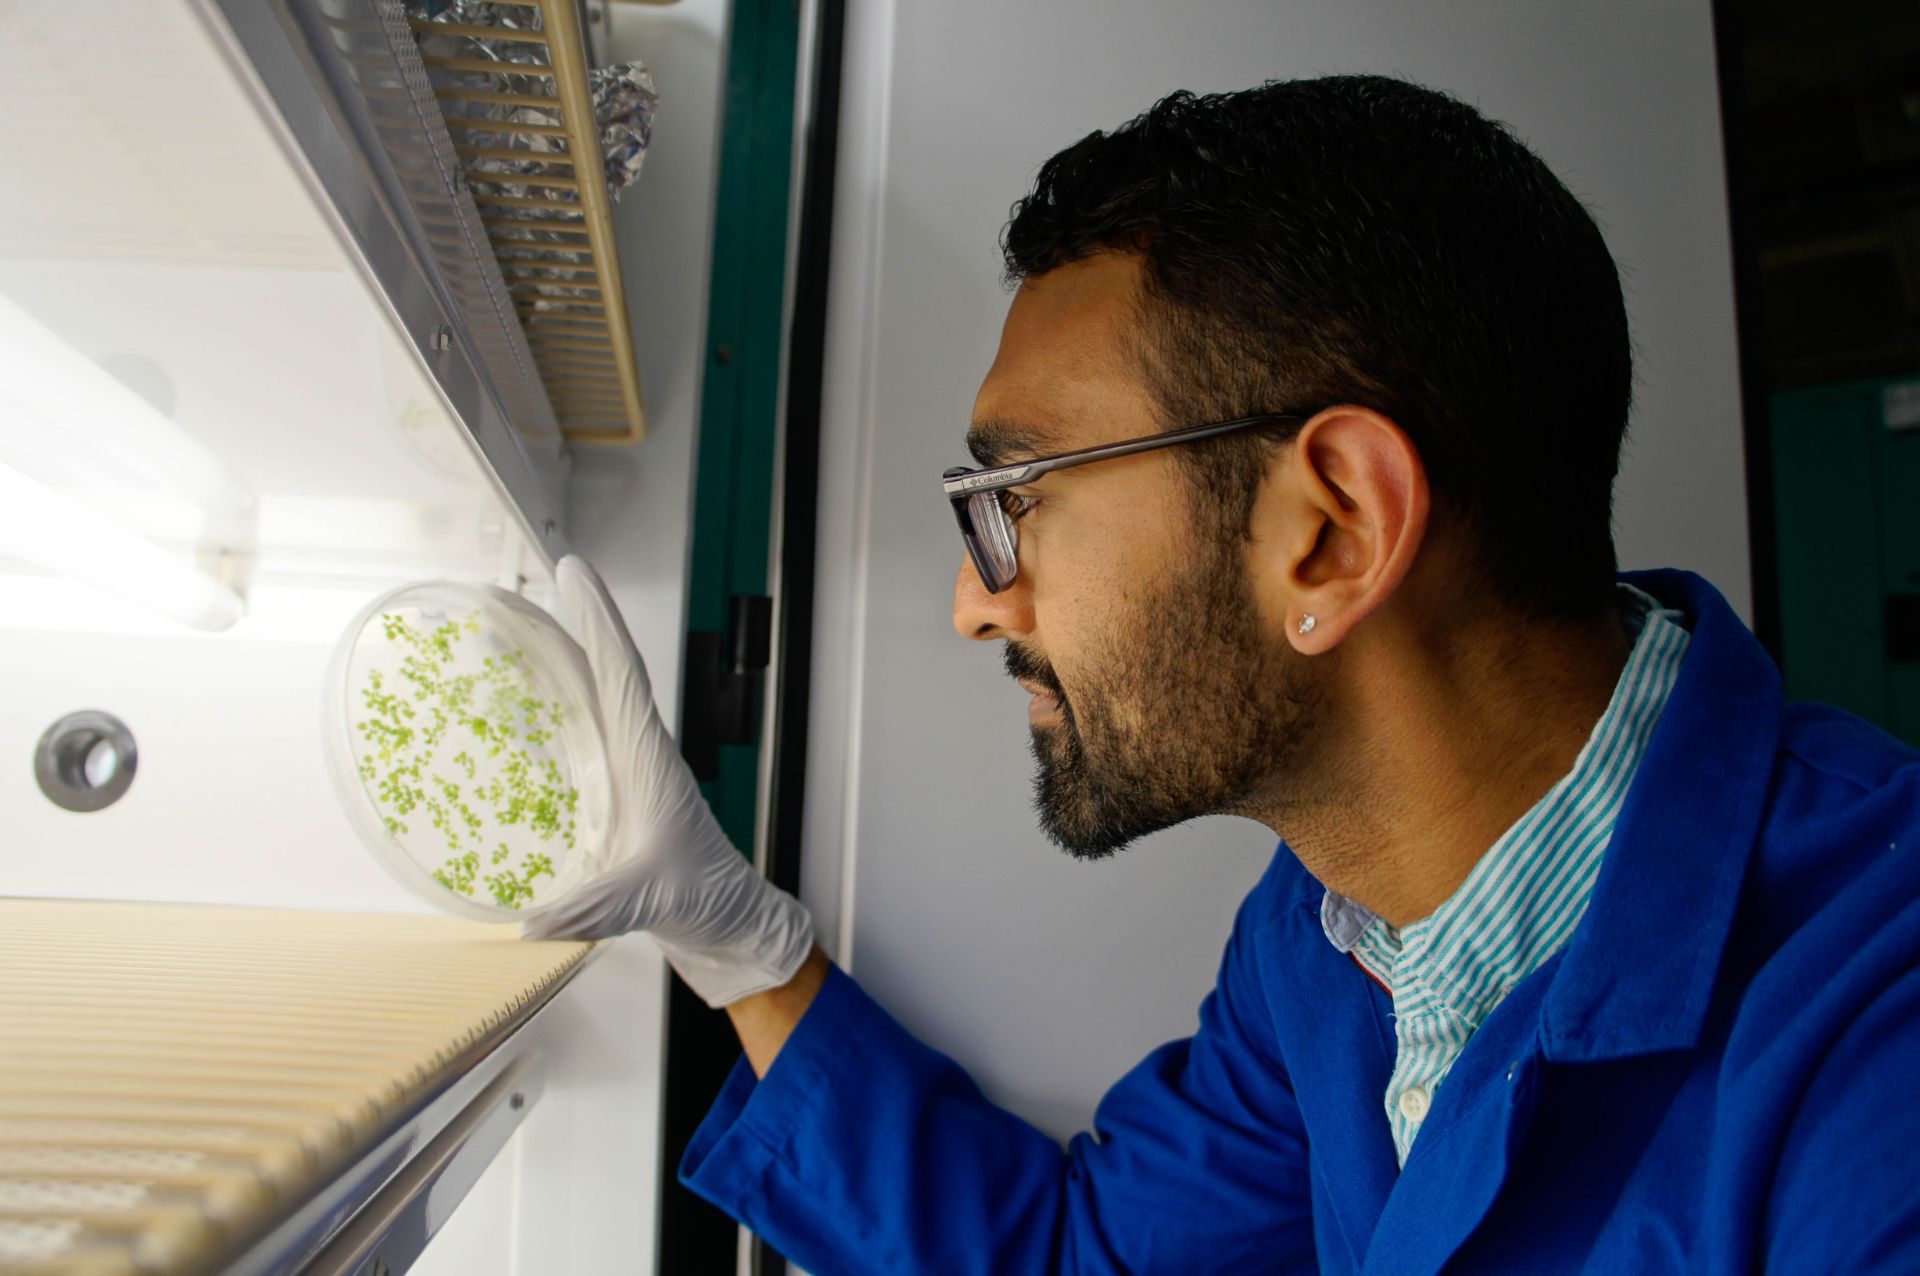 Dhruv Patel's side profile. He is wearing a lab coat and an earring. He is holding a petri dish which shows small green splotches. The dish appears to be taken out from a bright shelf.